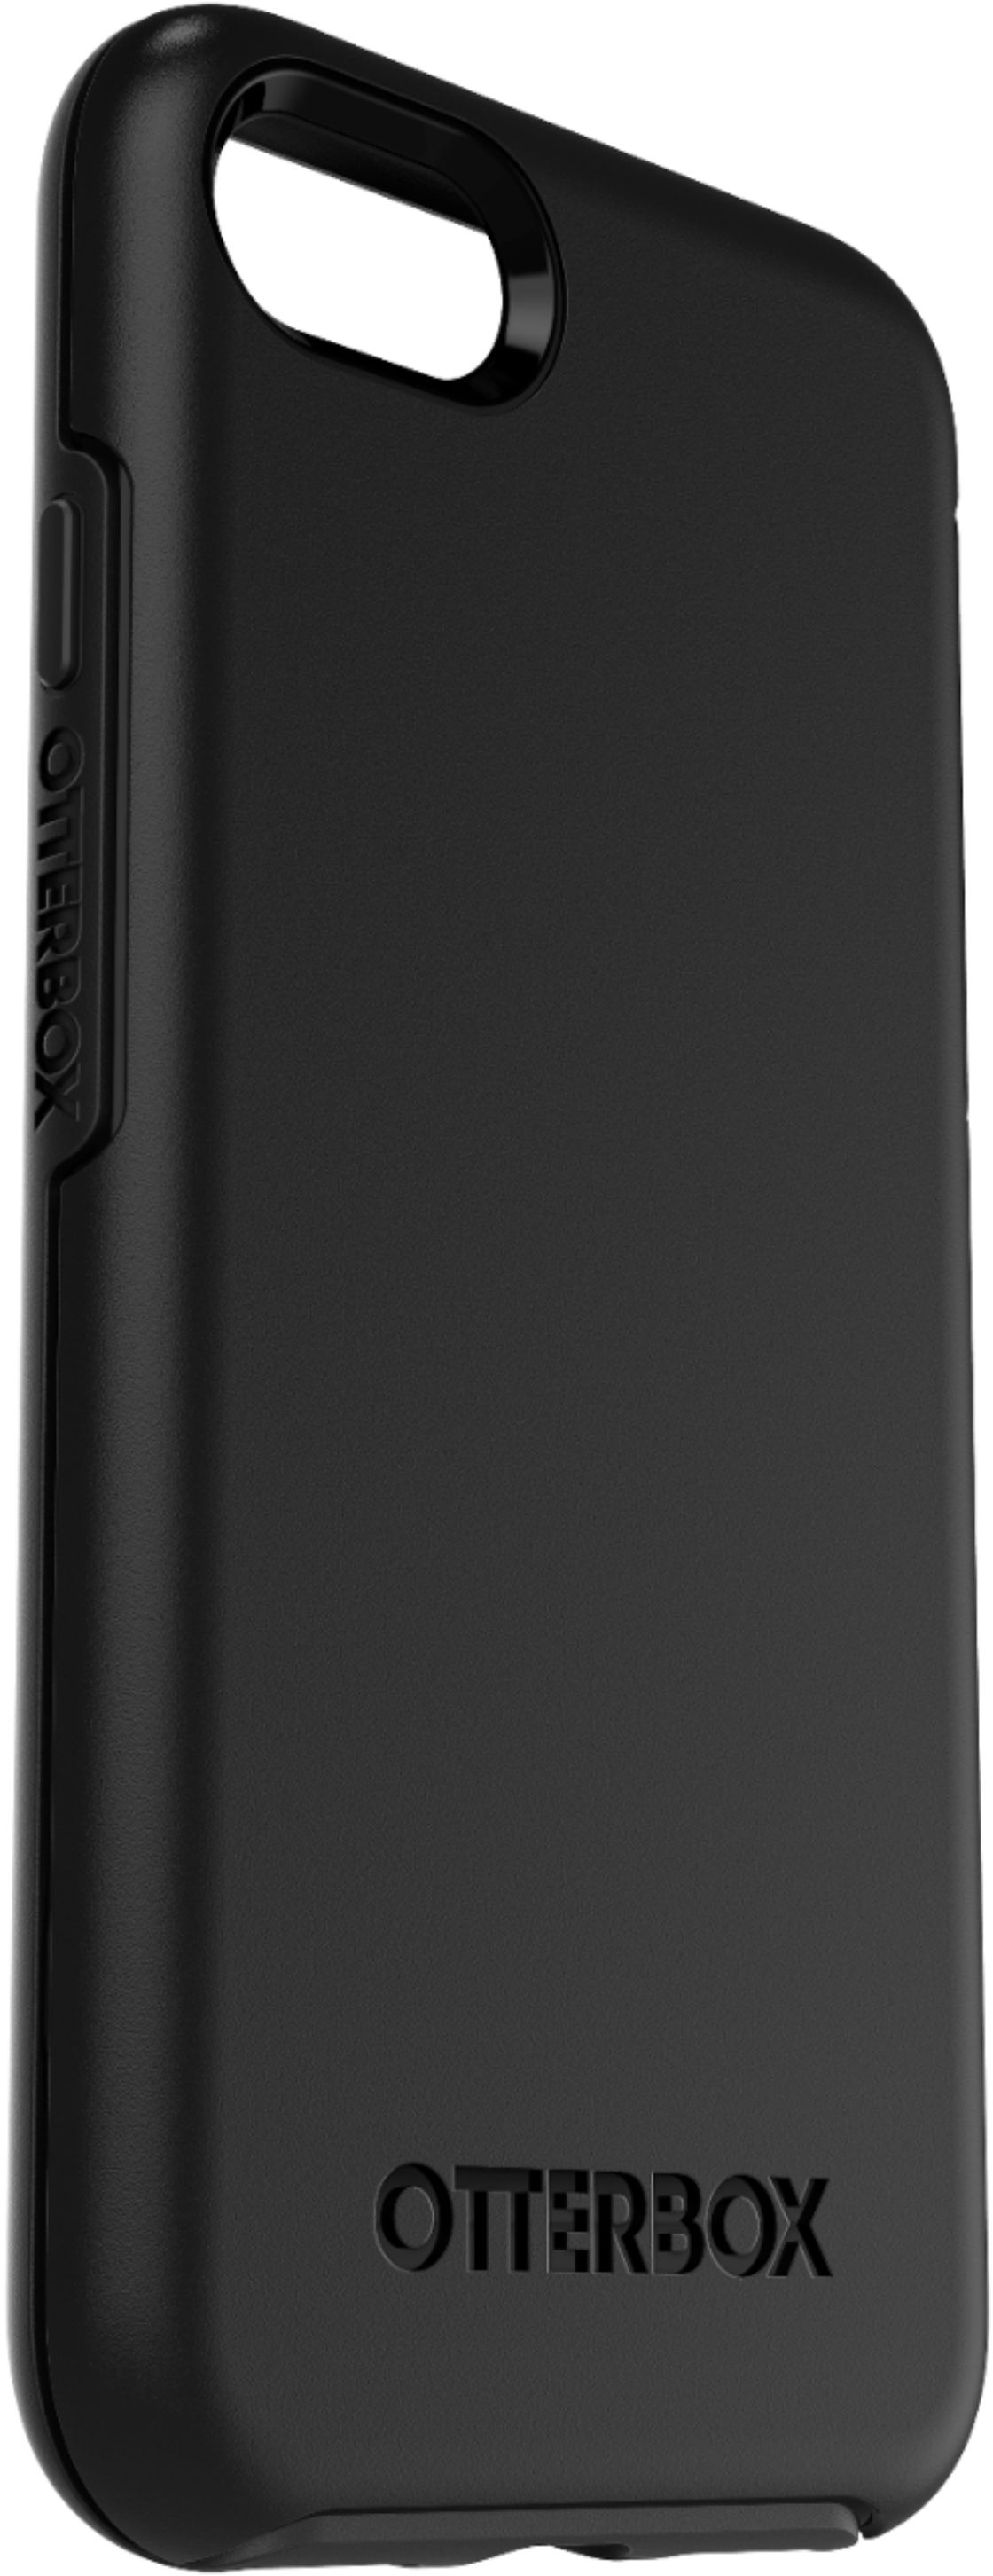 Angle View: OtterBox - Symmetry Series Hard Shell Case for Apple iPhone 7, 8 and SE (2nd generation) - Black